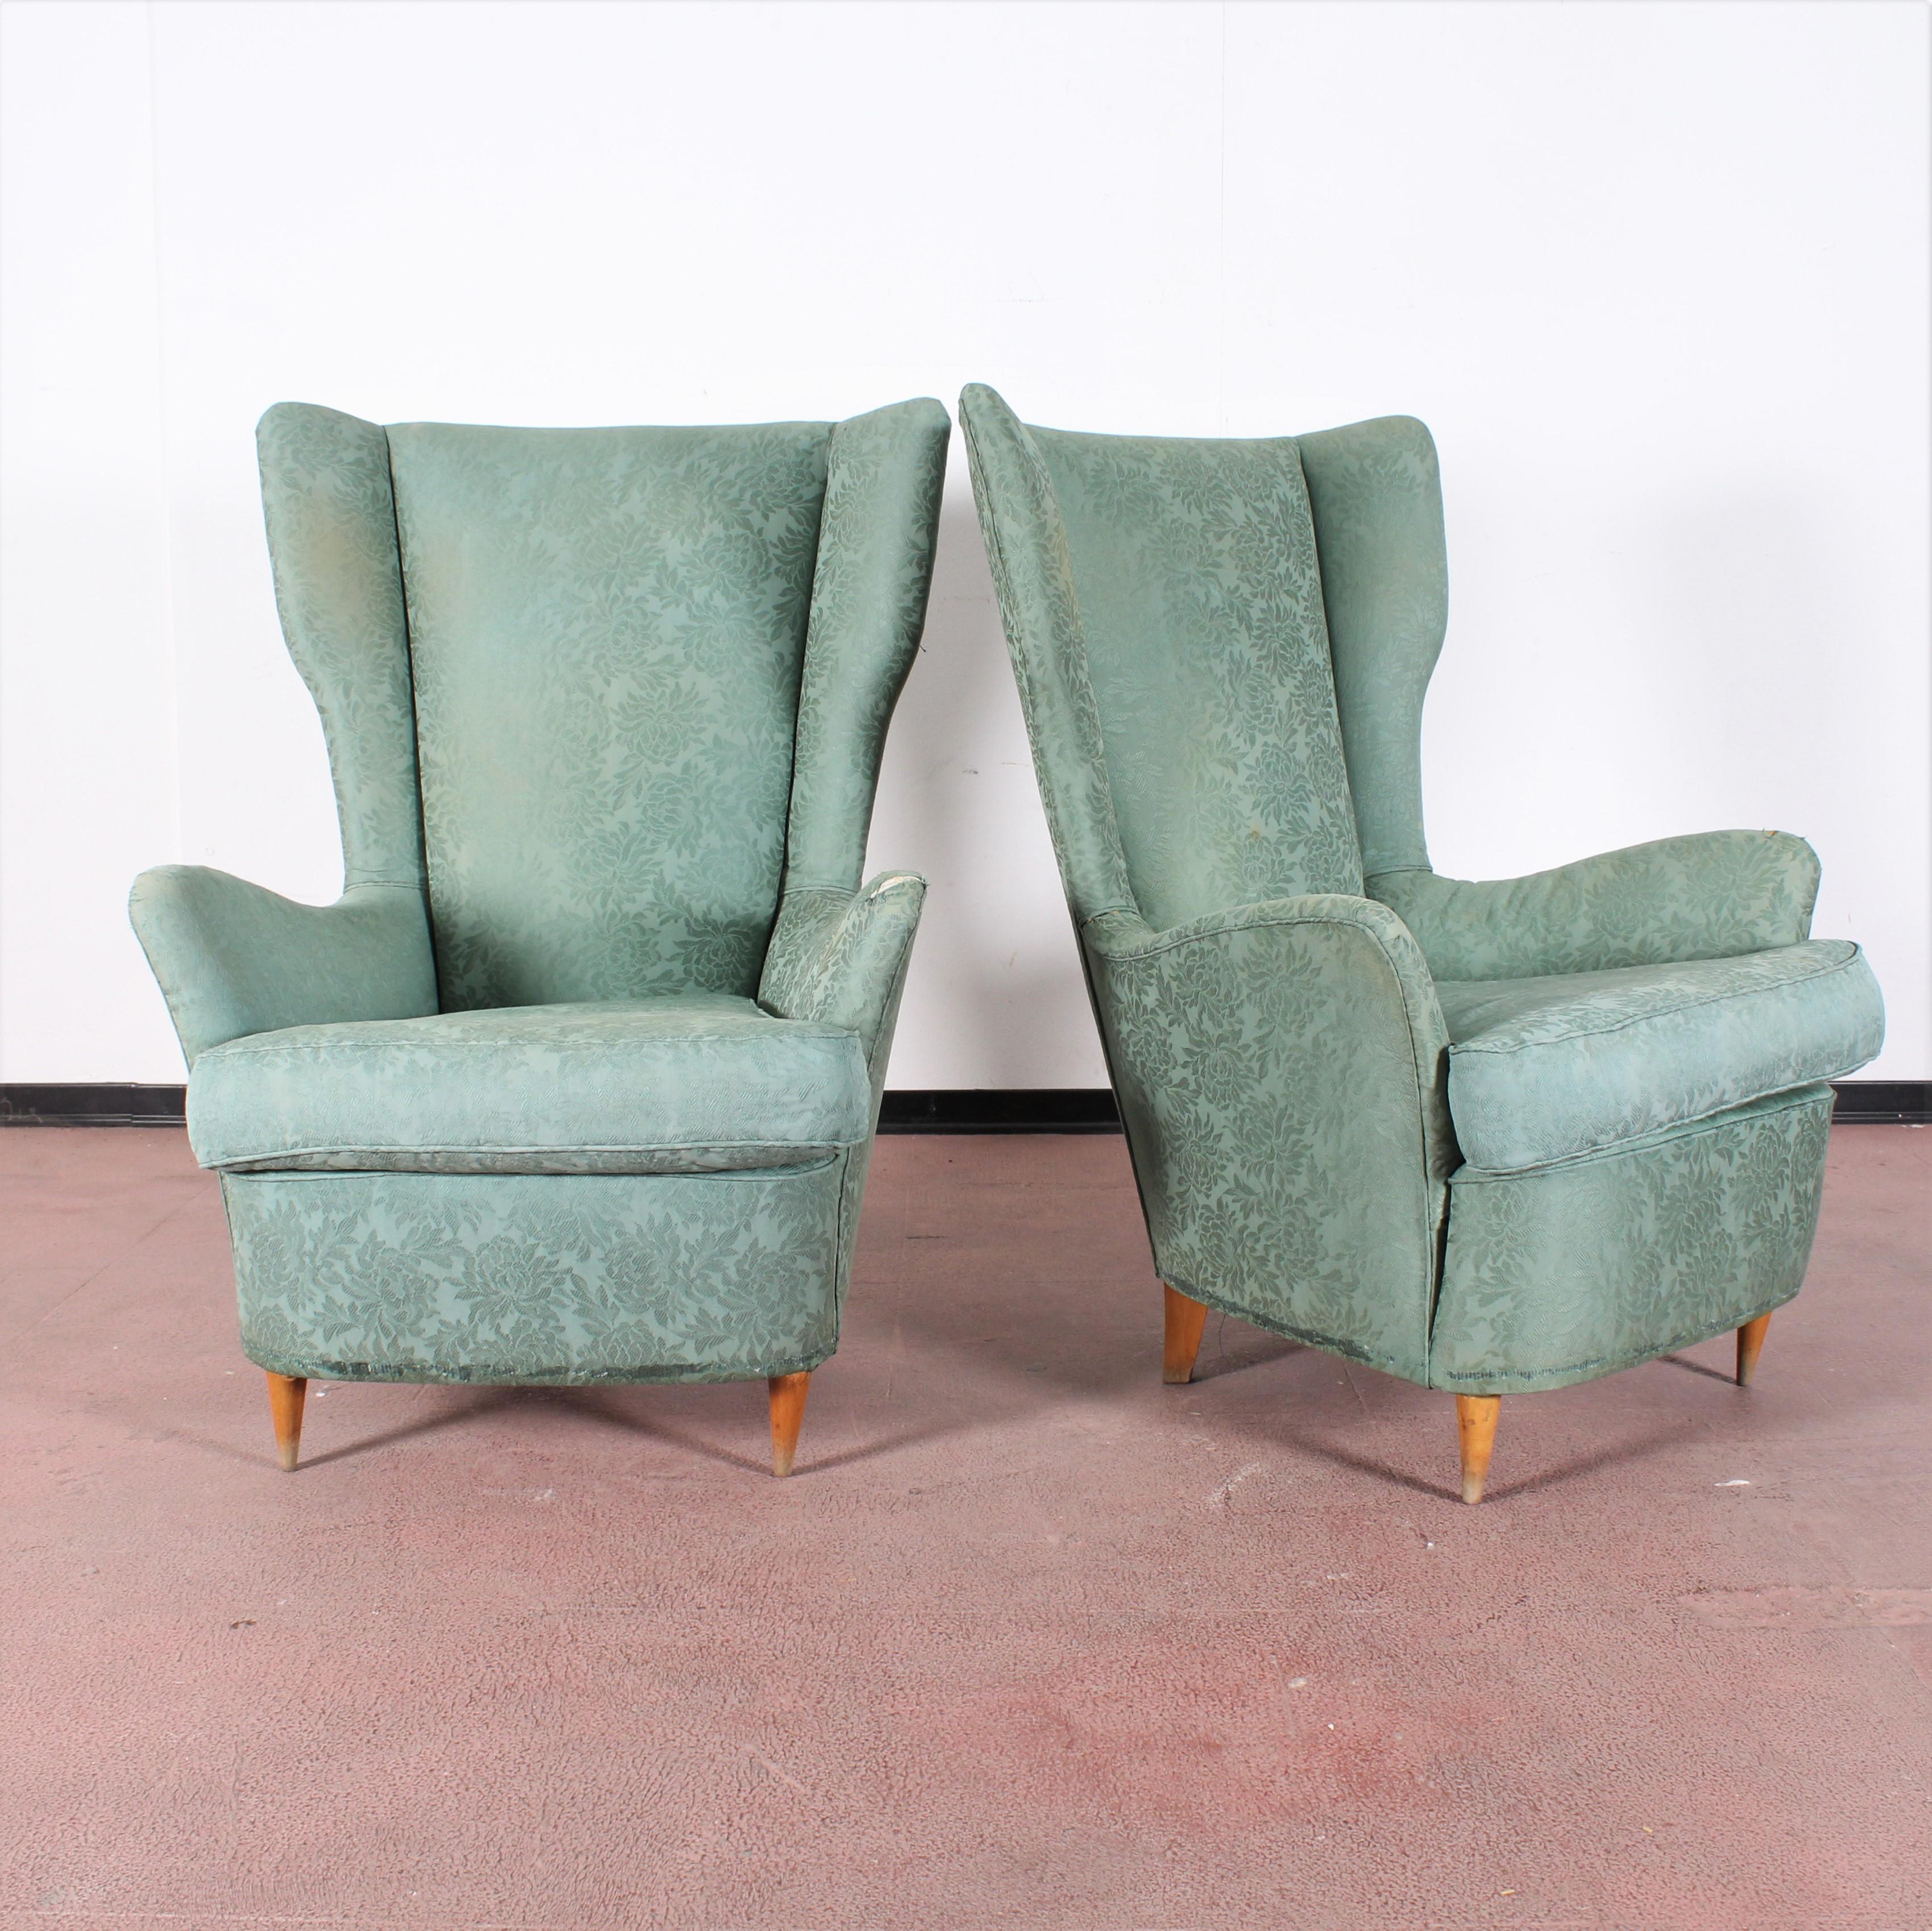 Stylish wingback armchairs, in floral green fabric and wooden feet to Gio Ponti for I.S.A. Bergamo, 1950s Italy.
Wear consistent with age and use.